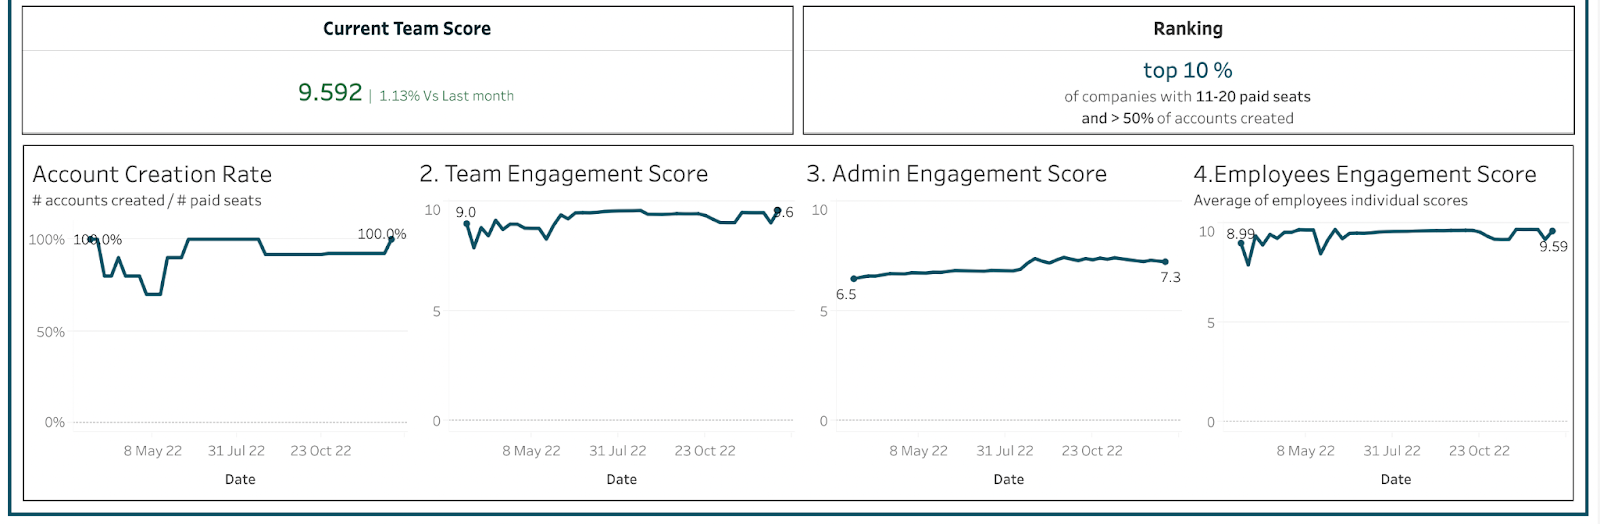 An overview chart of the customer engagement scores and parameters. Two text boxes at the top are labeled “Current Team Score” and “Ranking.” The “Current Team Score” is “9.592,” and this is written in green to denote a positive change with an adjacent note of “1.13% vs. last month.” The “Ranking” is “top 10% of companies with 11-20 paid seats and &gt; 50% of accounts created.” Below, there are three mini charts representing rises and falls over time of “Account Creation Rate,” “Team Engagement Score,” “Admin Engagement Score,” and “Employee Engagement Score.” 